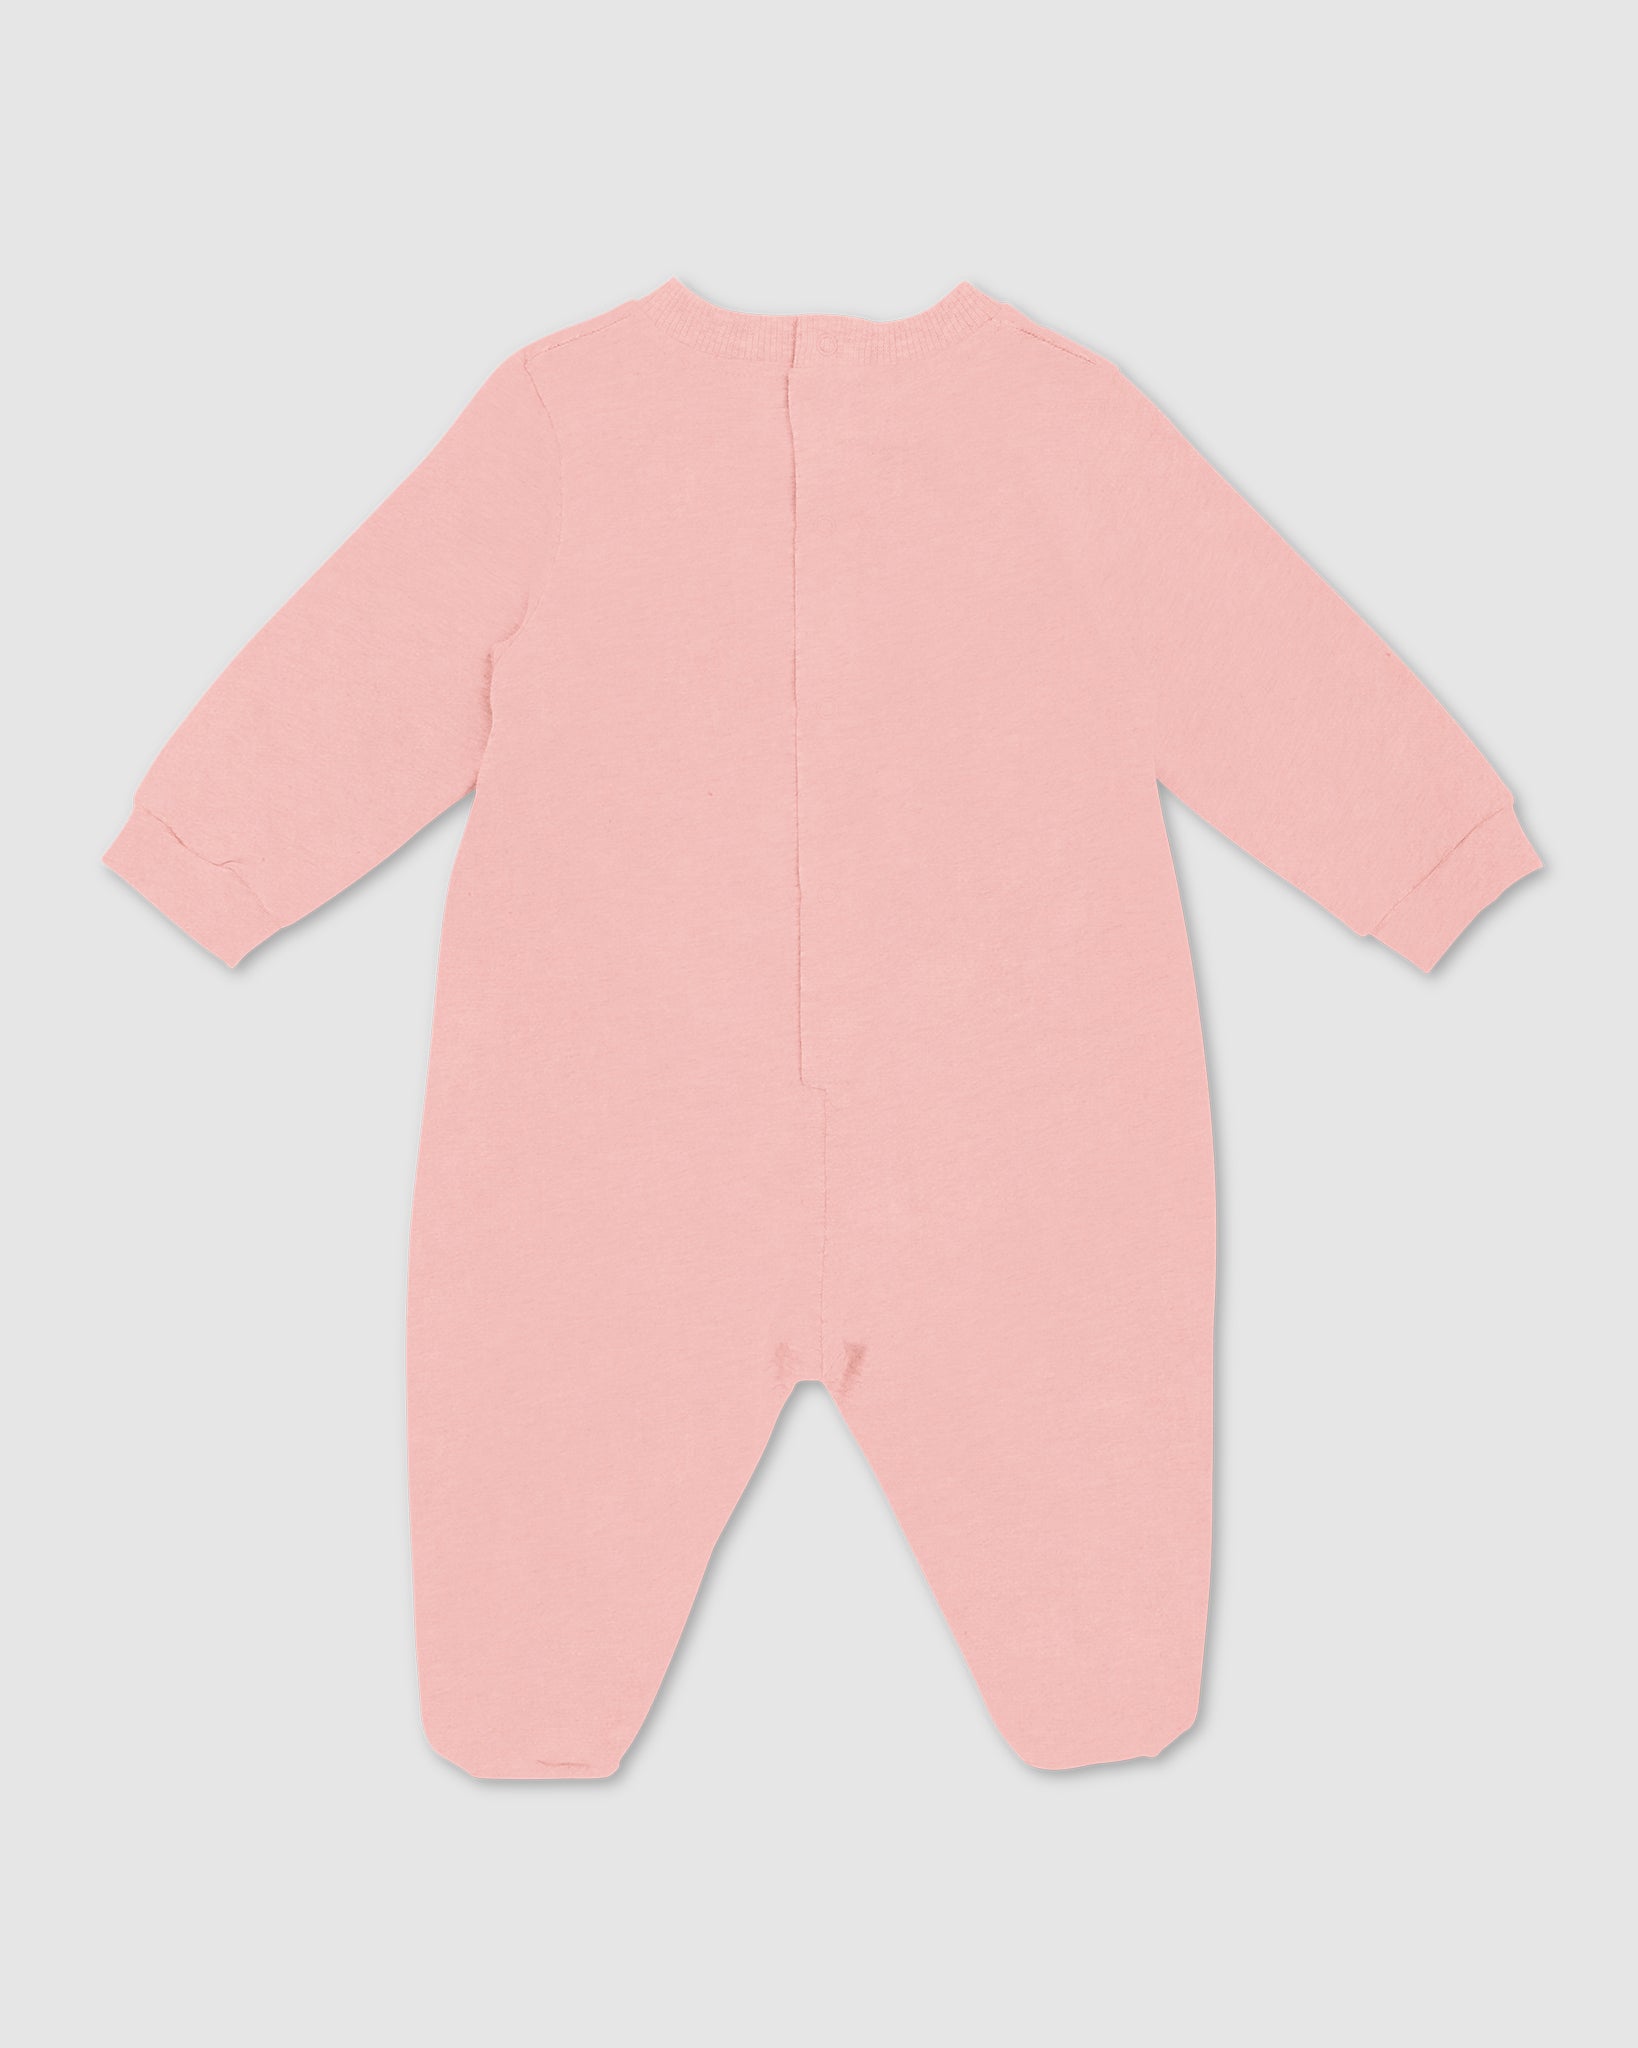 Baby Cherry Playsuit: Girl Playsuits White/Pink Off | GCDS Set and Gift